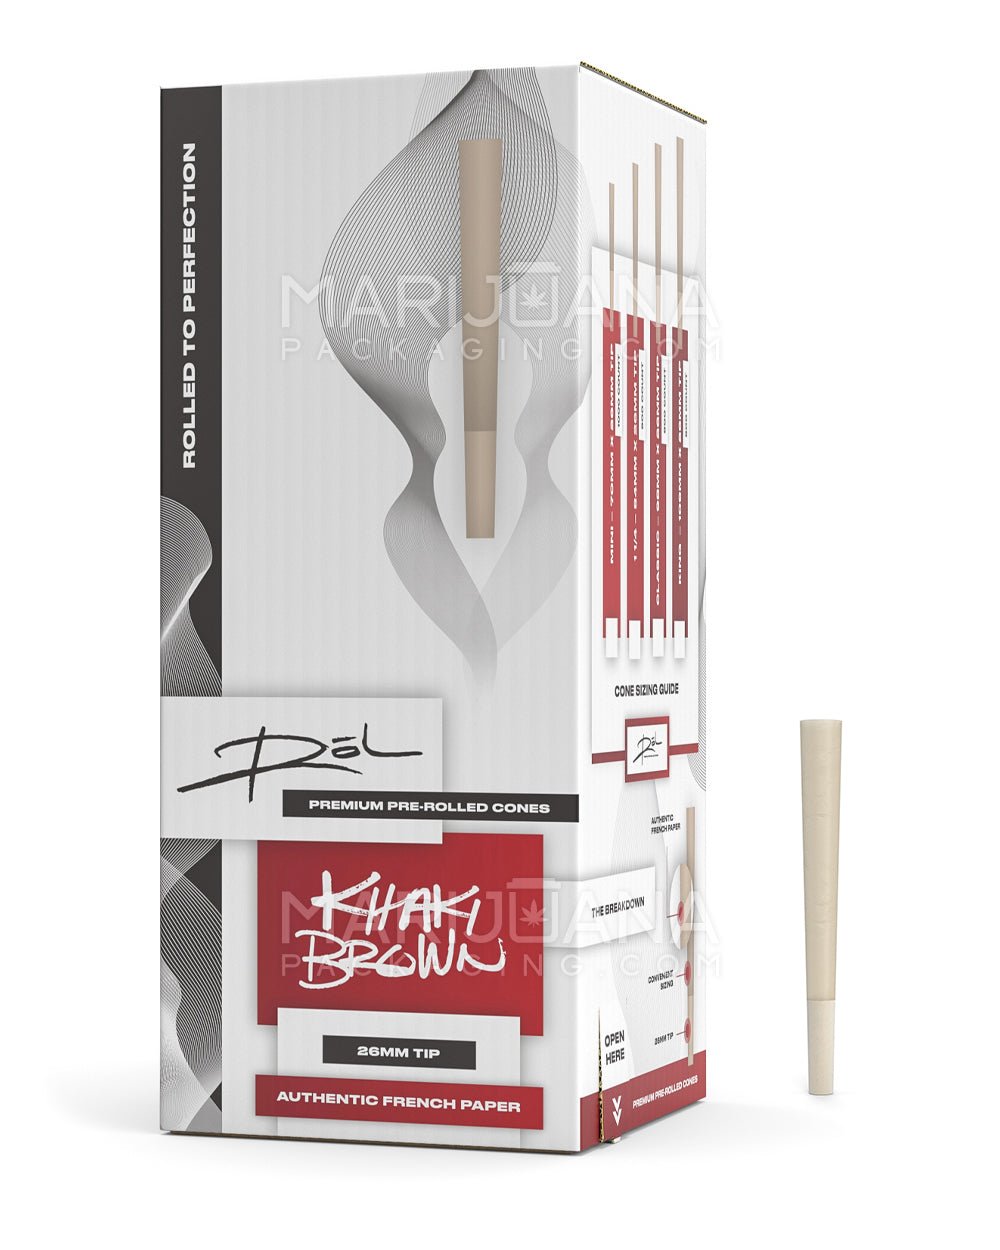 ROL | 1 1/4th Size Pre-Rolled Cones | 84mm - Khaki Brown Paper - 900 Count - 1